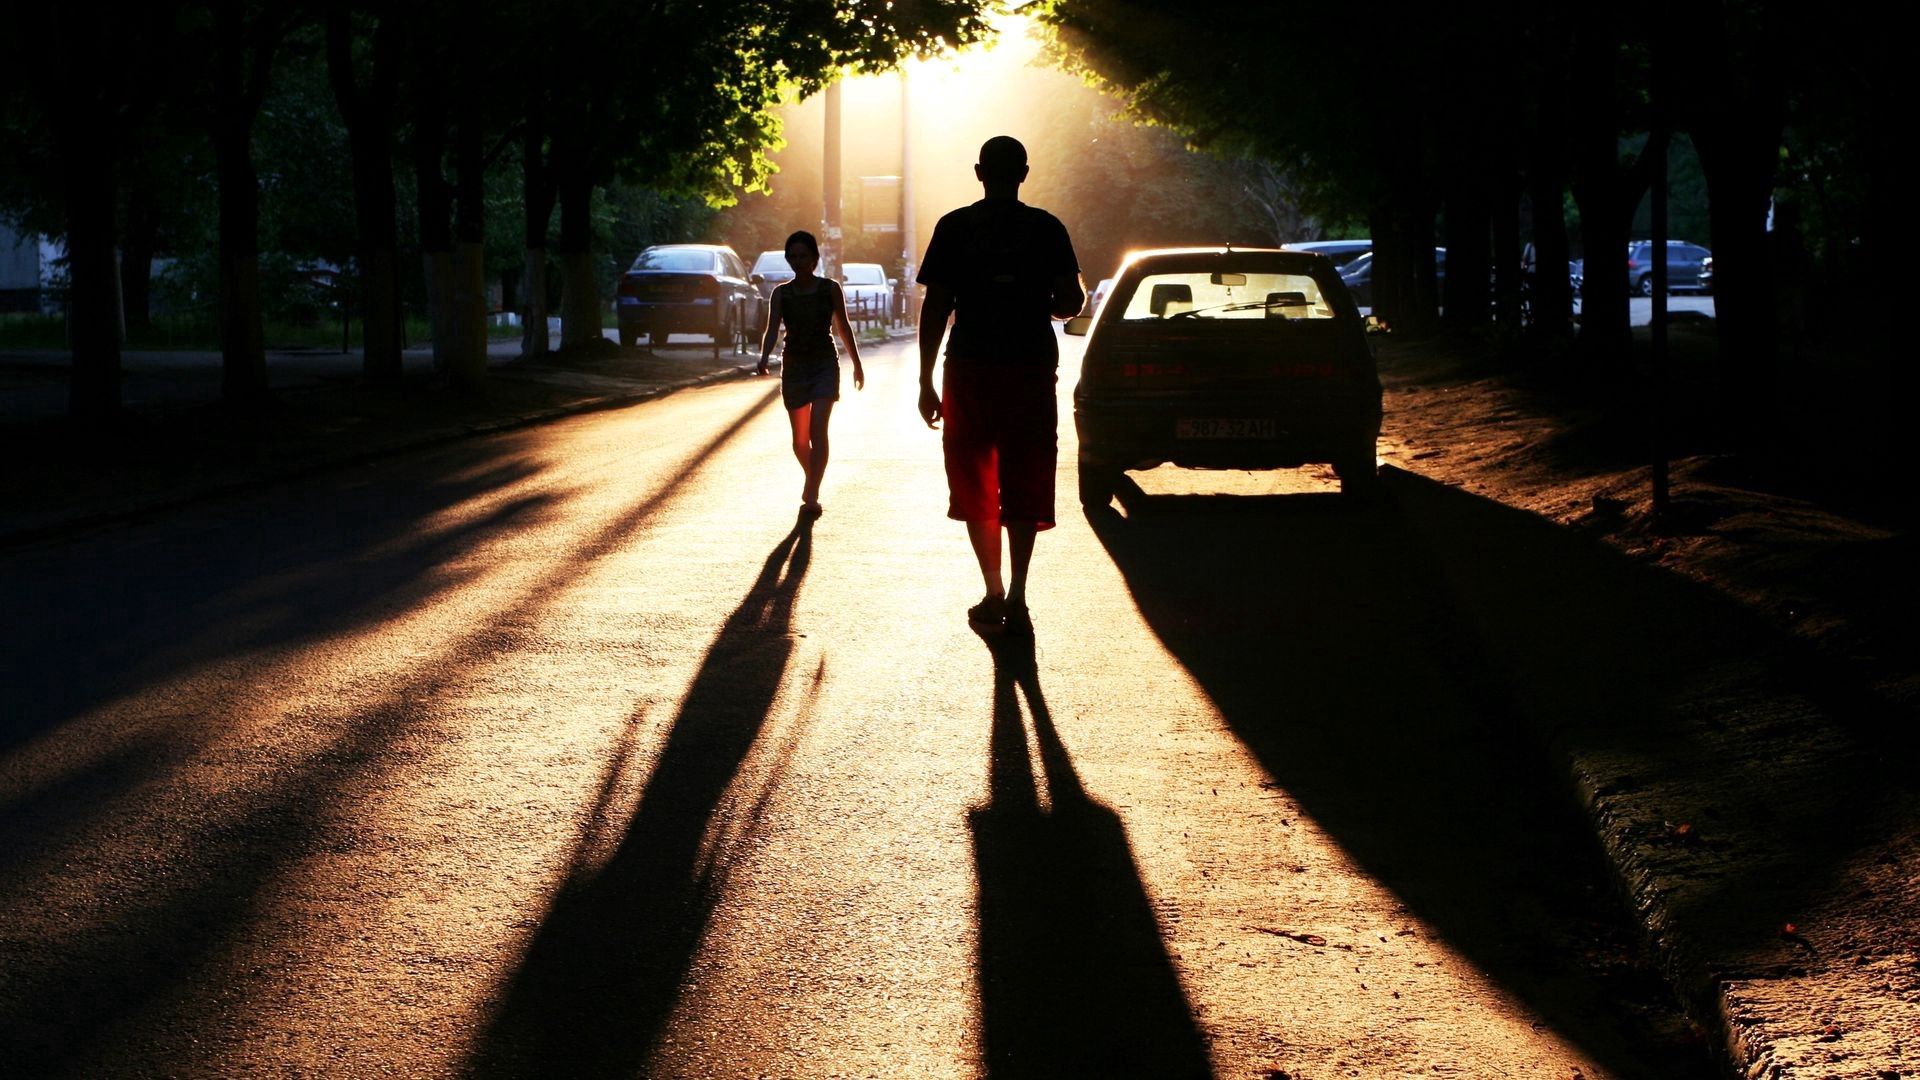 people, cars, miscellanea, miscellaneous, road, silhouettes, shadow, evening